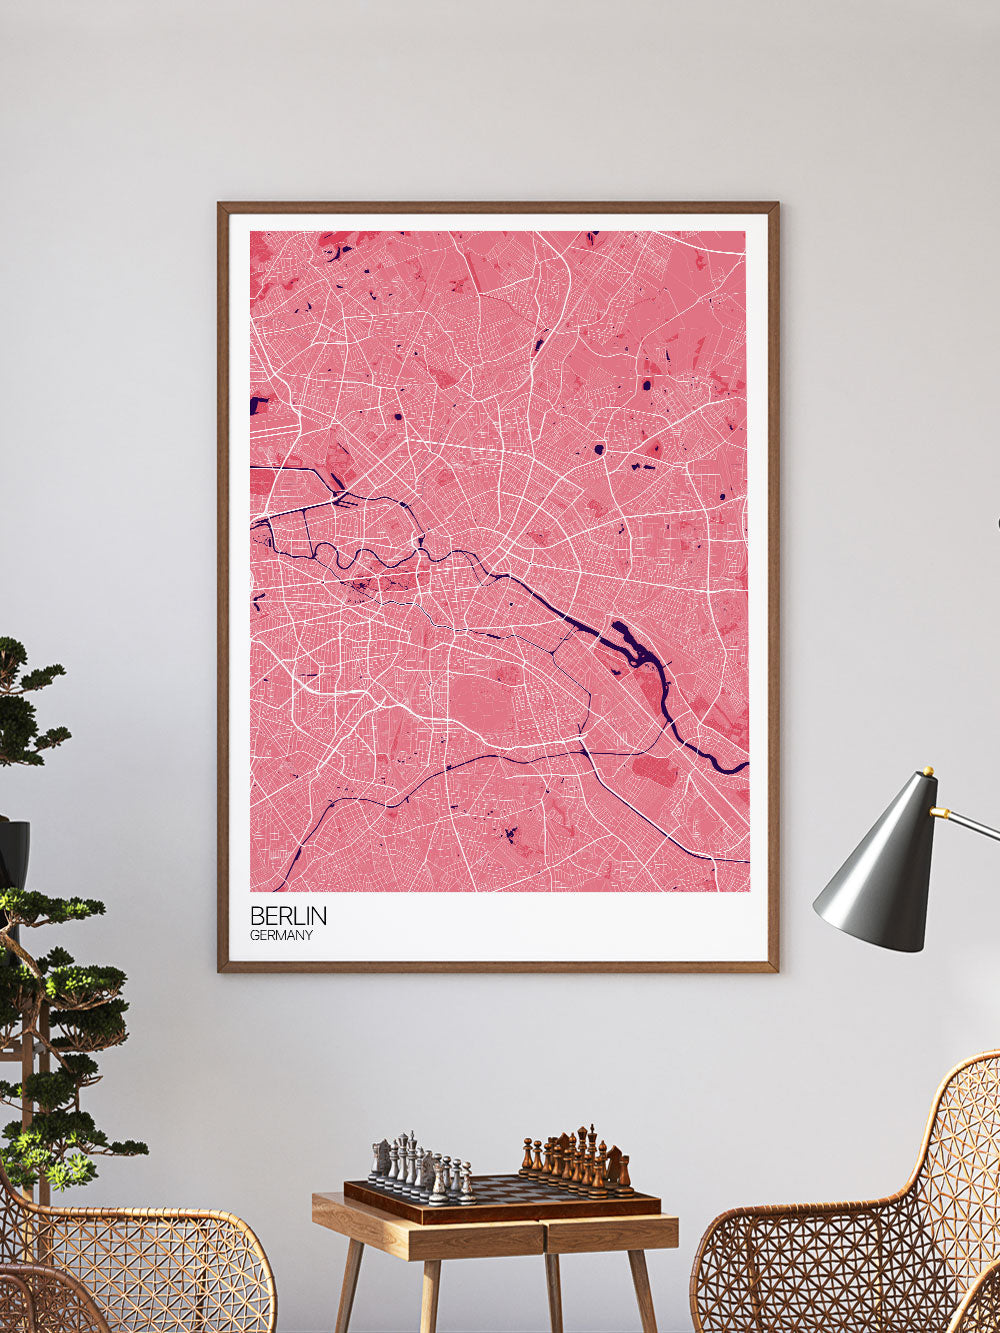 Berlin City Map Art Print in a frame on a wall